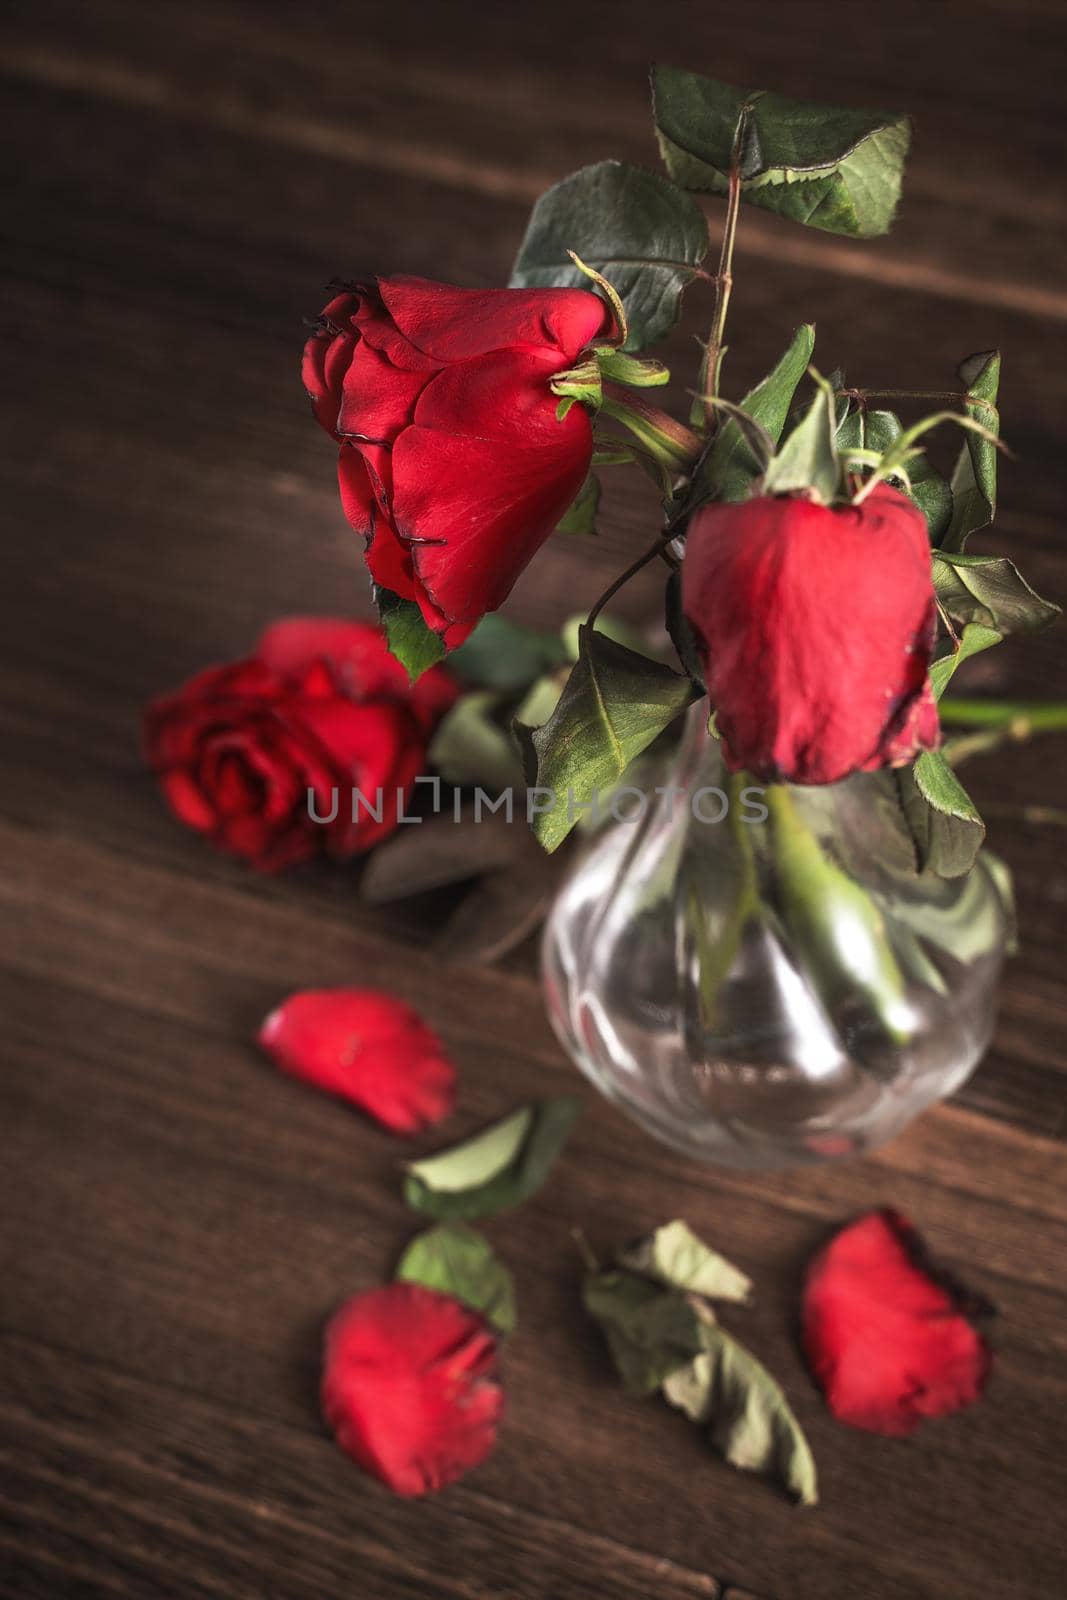 Withered rose on dark gray background and wooden table with fall petals and leaves, design concept of sad Valentine's day romance, broken up, copy,space.